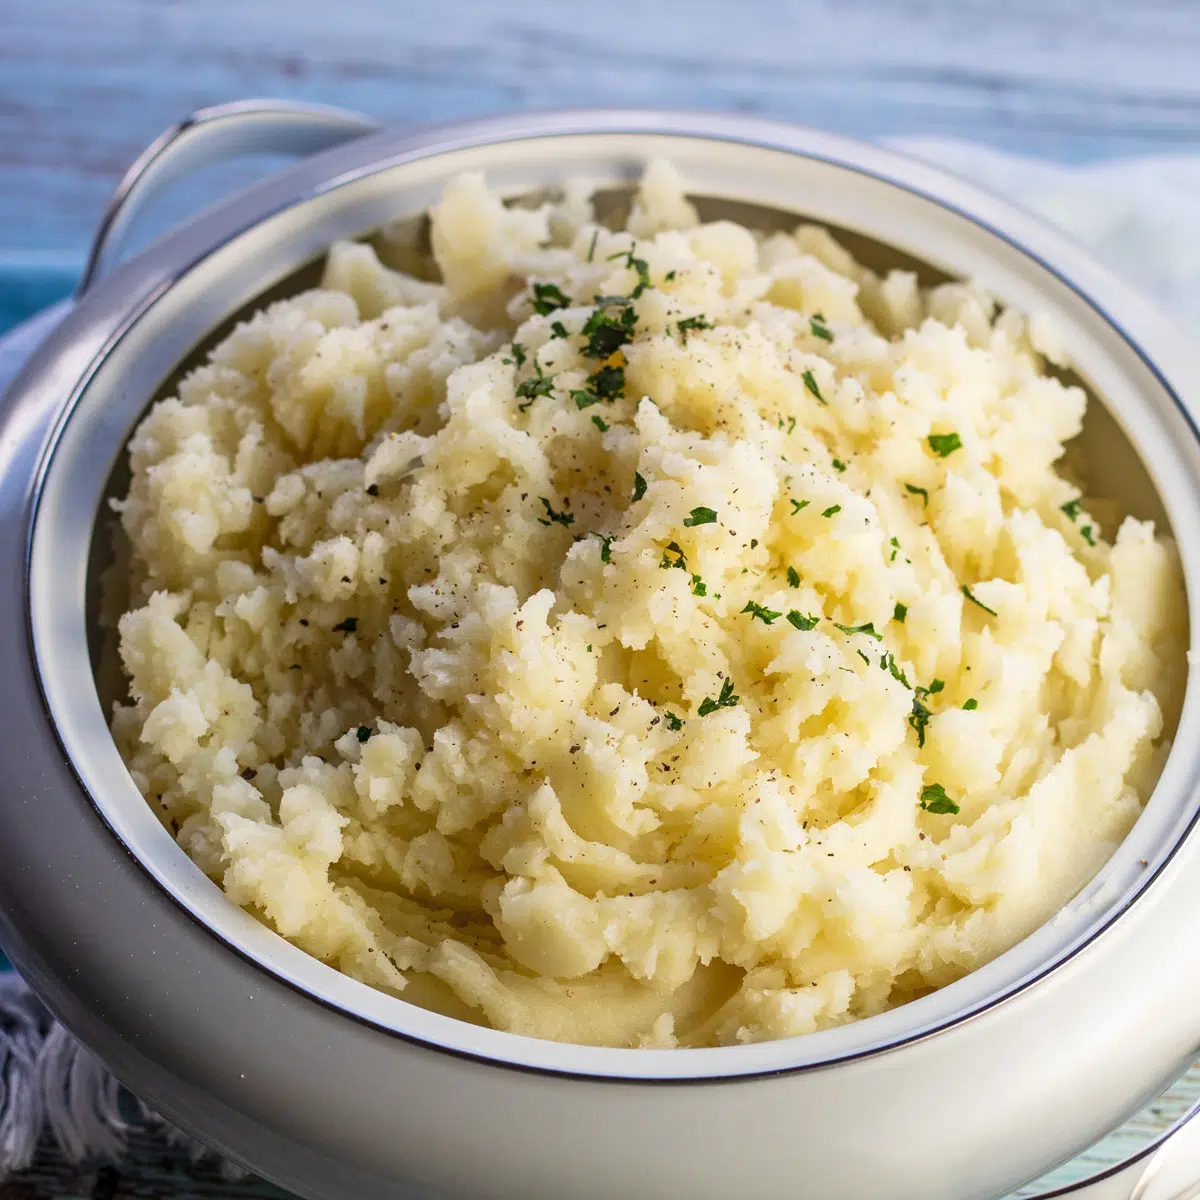 mashed potatoes without milk sq.jpg